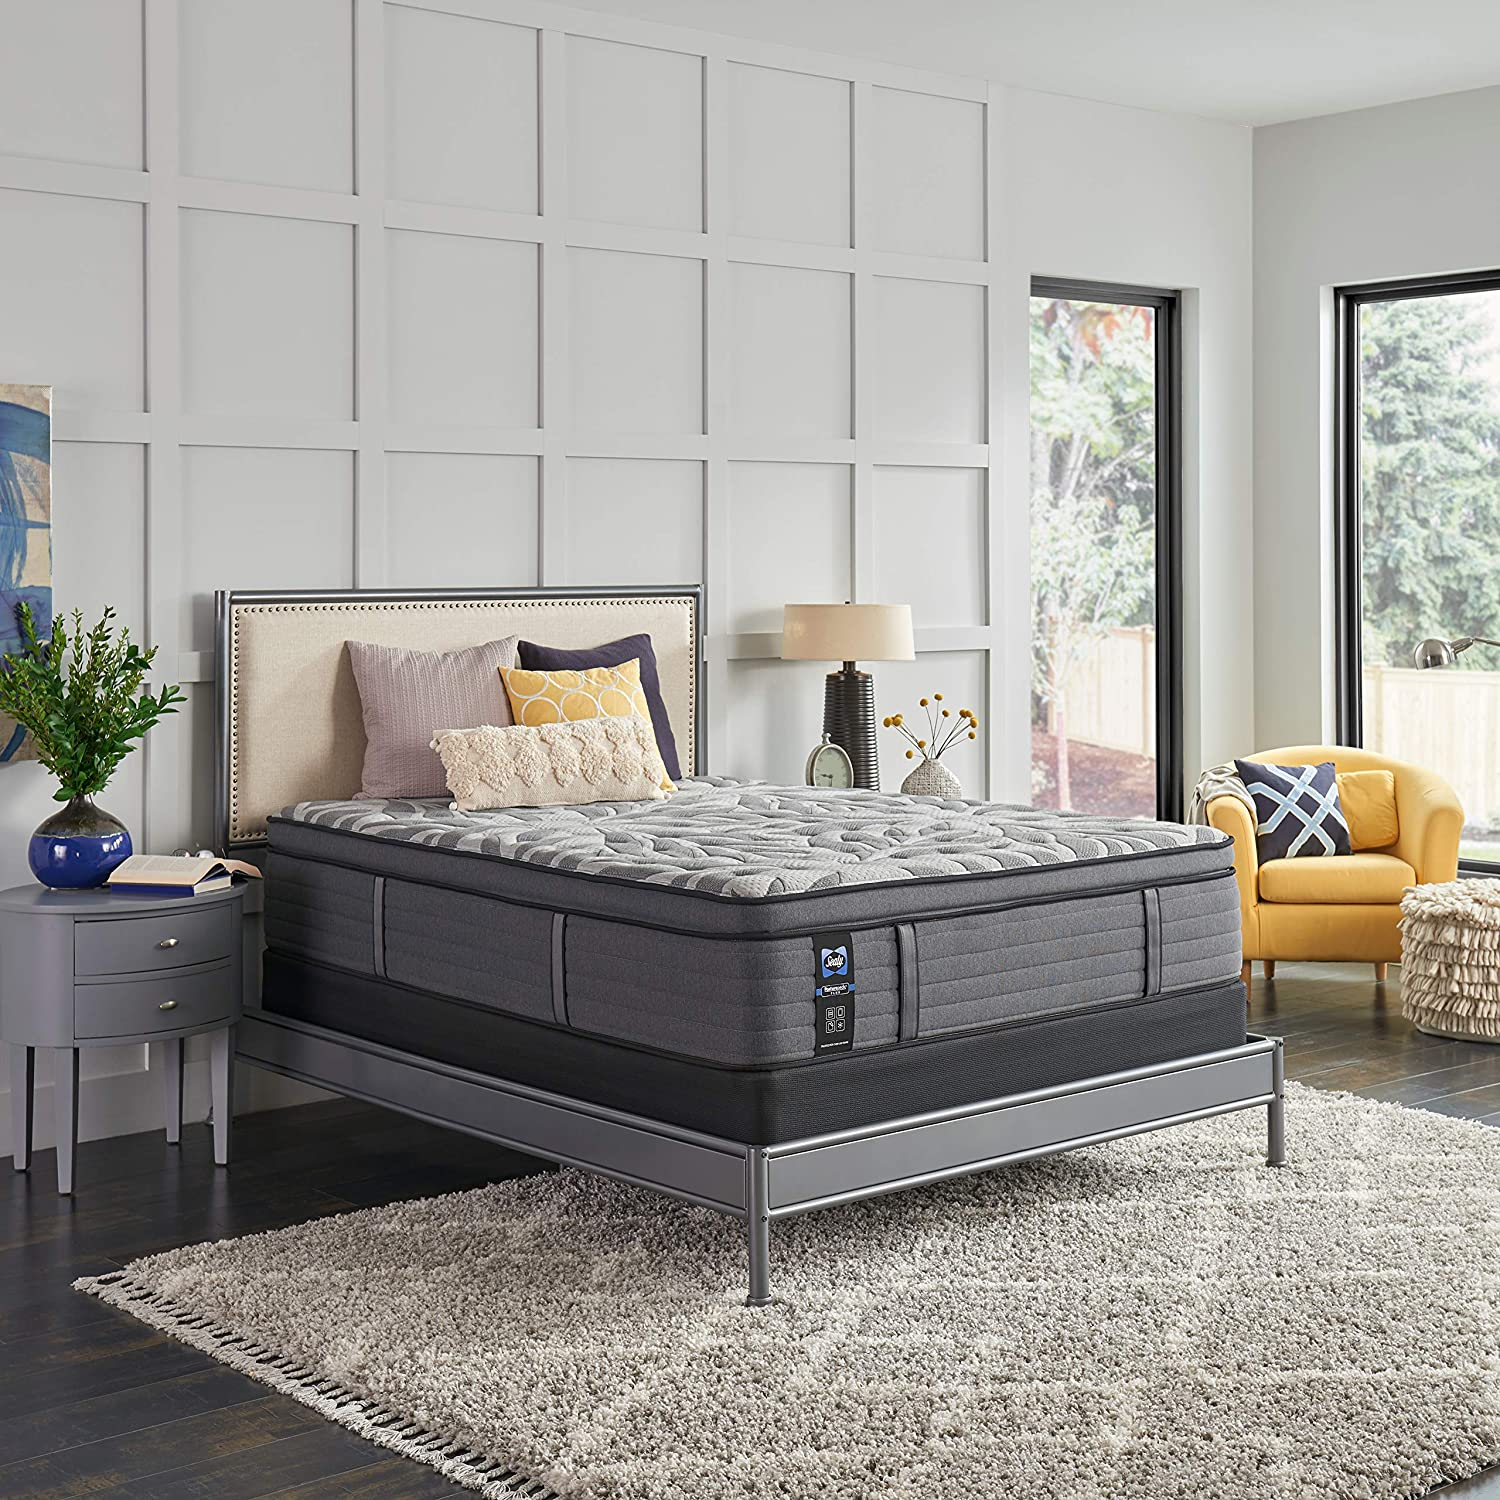 When choosing between an orthopedic mattress vs. a Posturepedic mattress, a Posturepedic mattress like this will provide extra support and comfort.